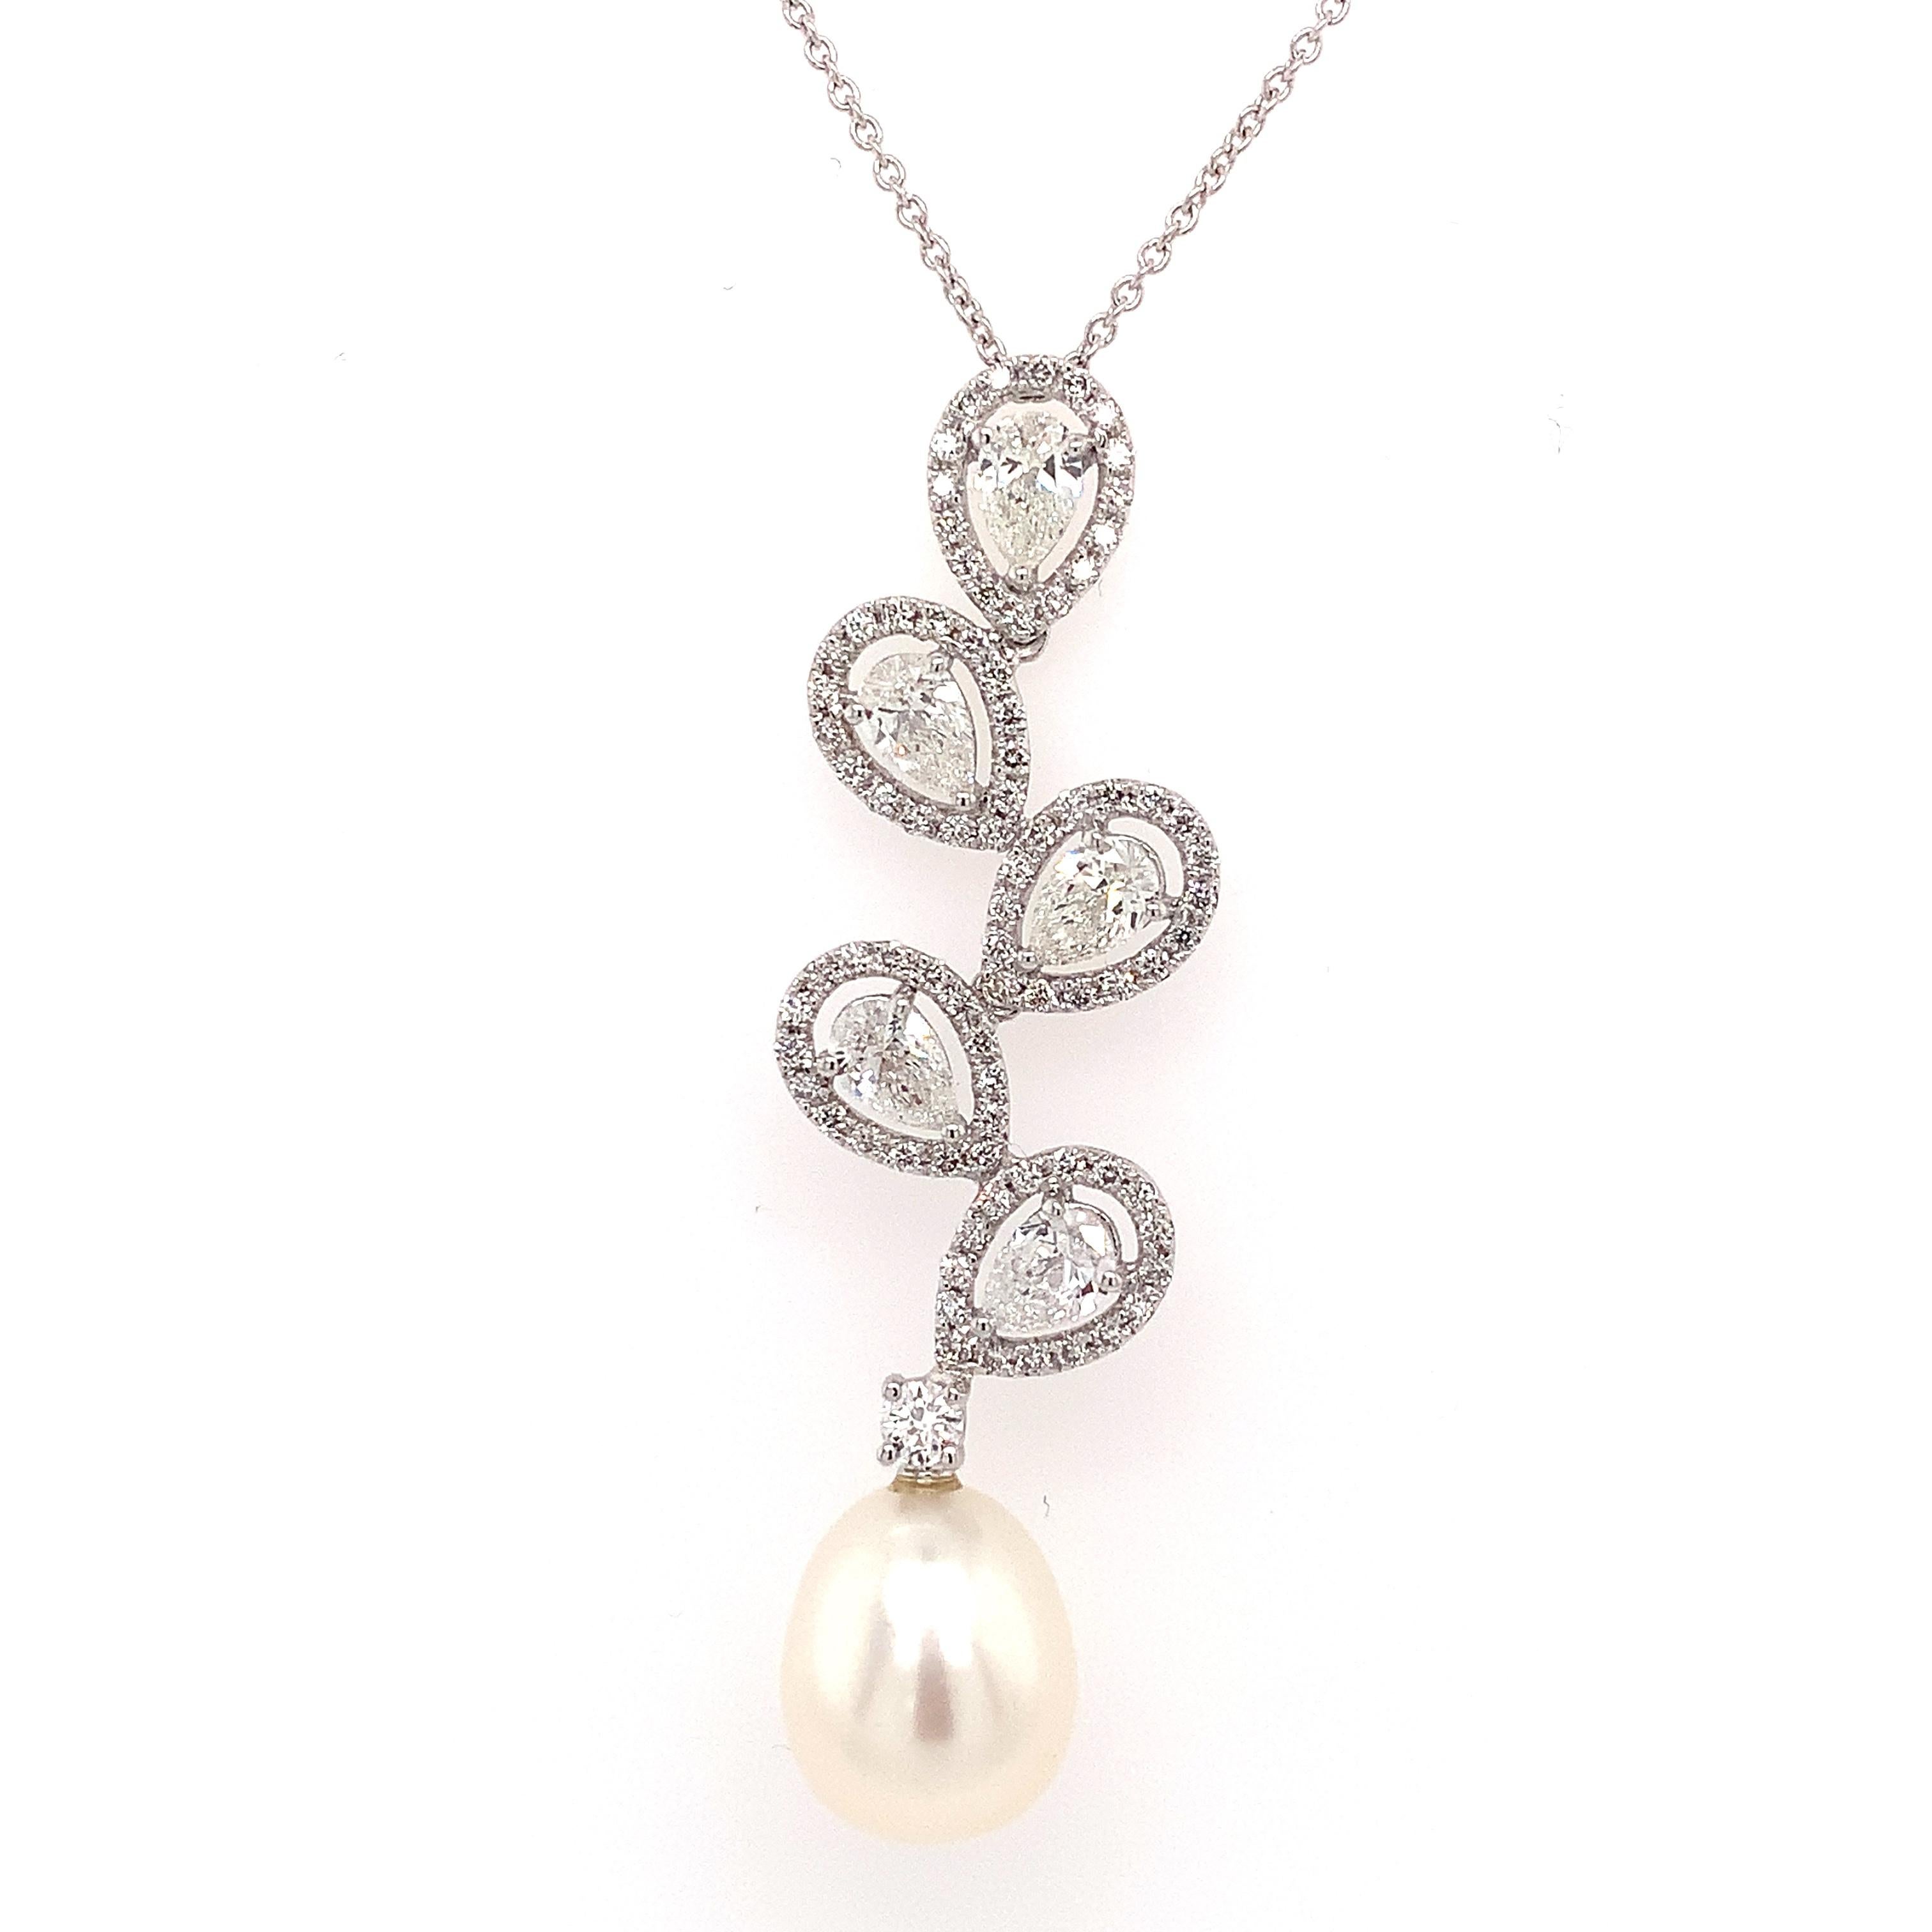 OWN Your Story 18K White Gold Four Petalled Fresh Water Pearl Flower Drop Necklace

OWN Your Story brings its 3 generations of family tradition and unparalleled experience with 18K gold, diamonds, and gemstones to create high-level jewelry